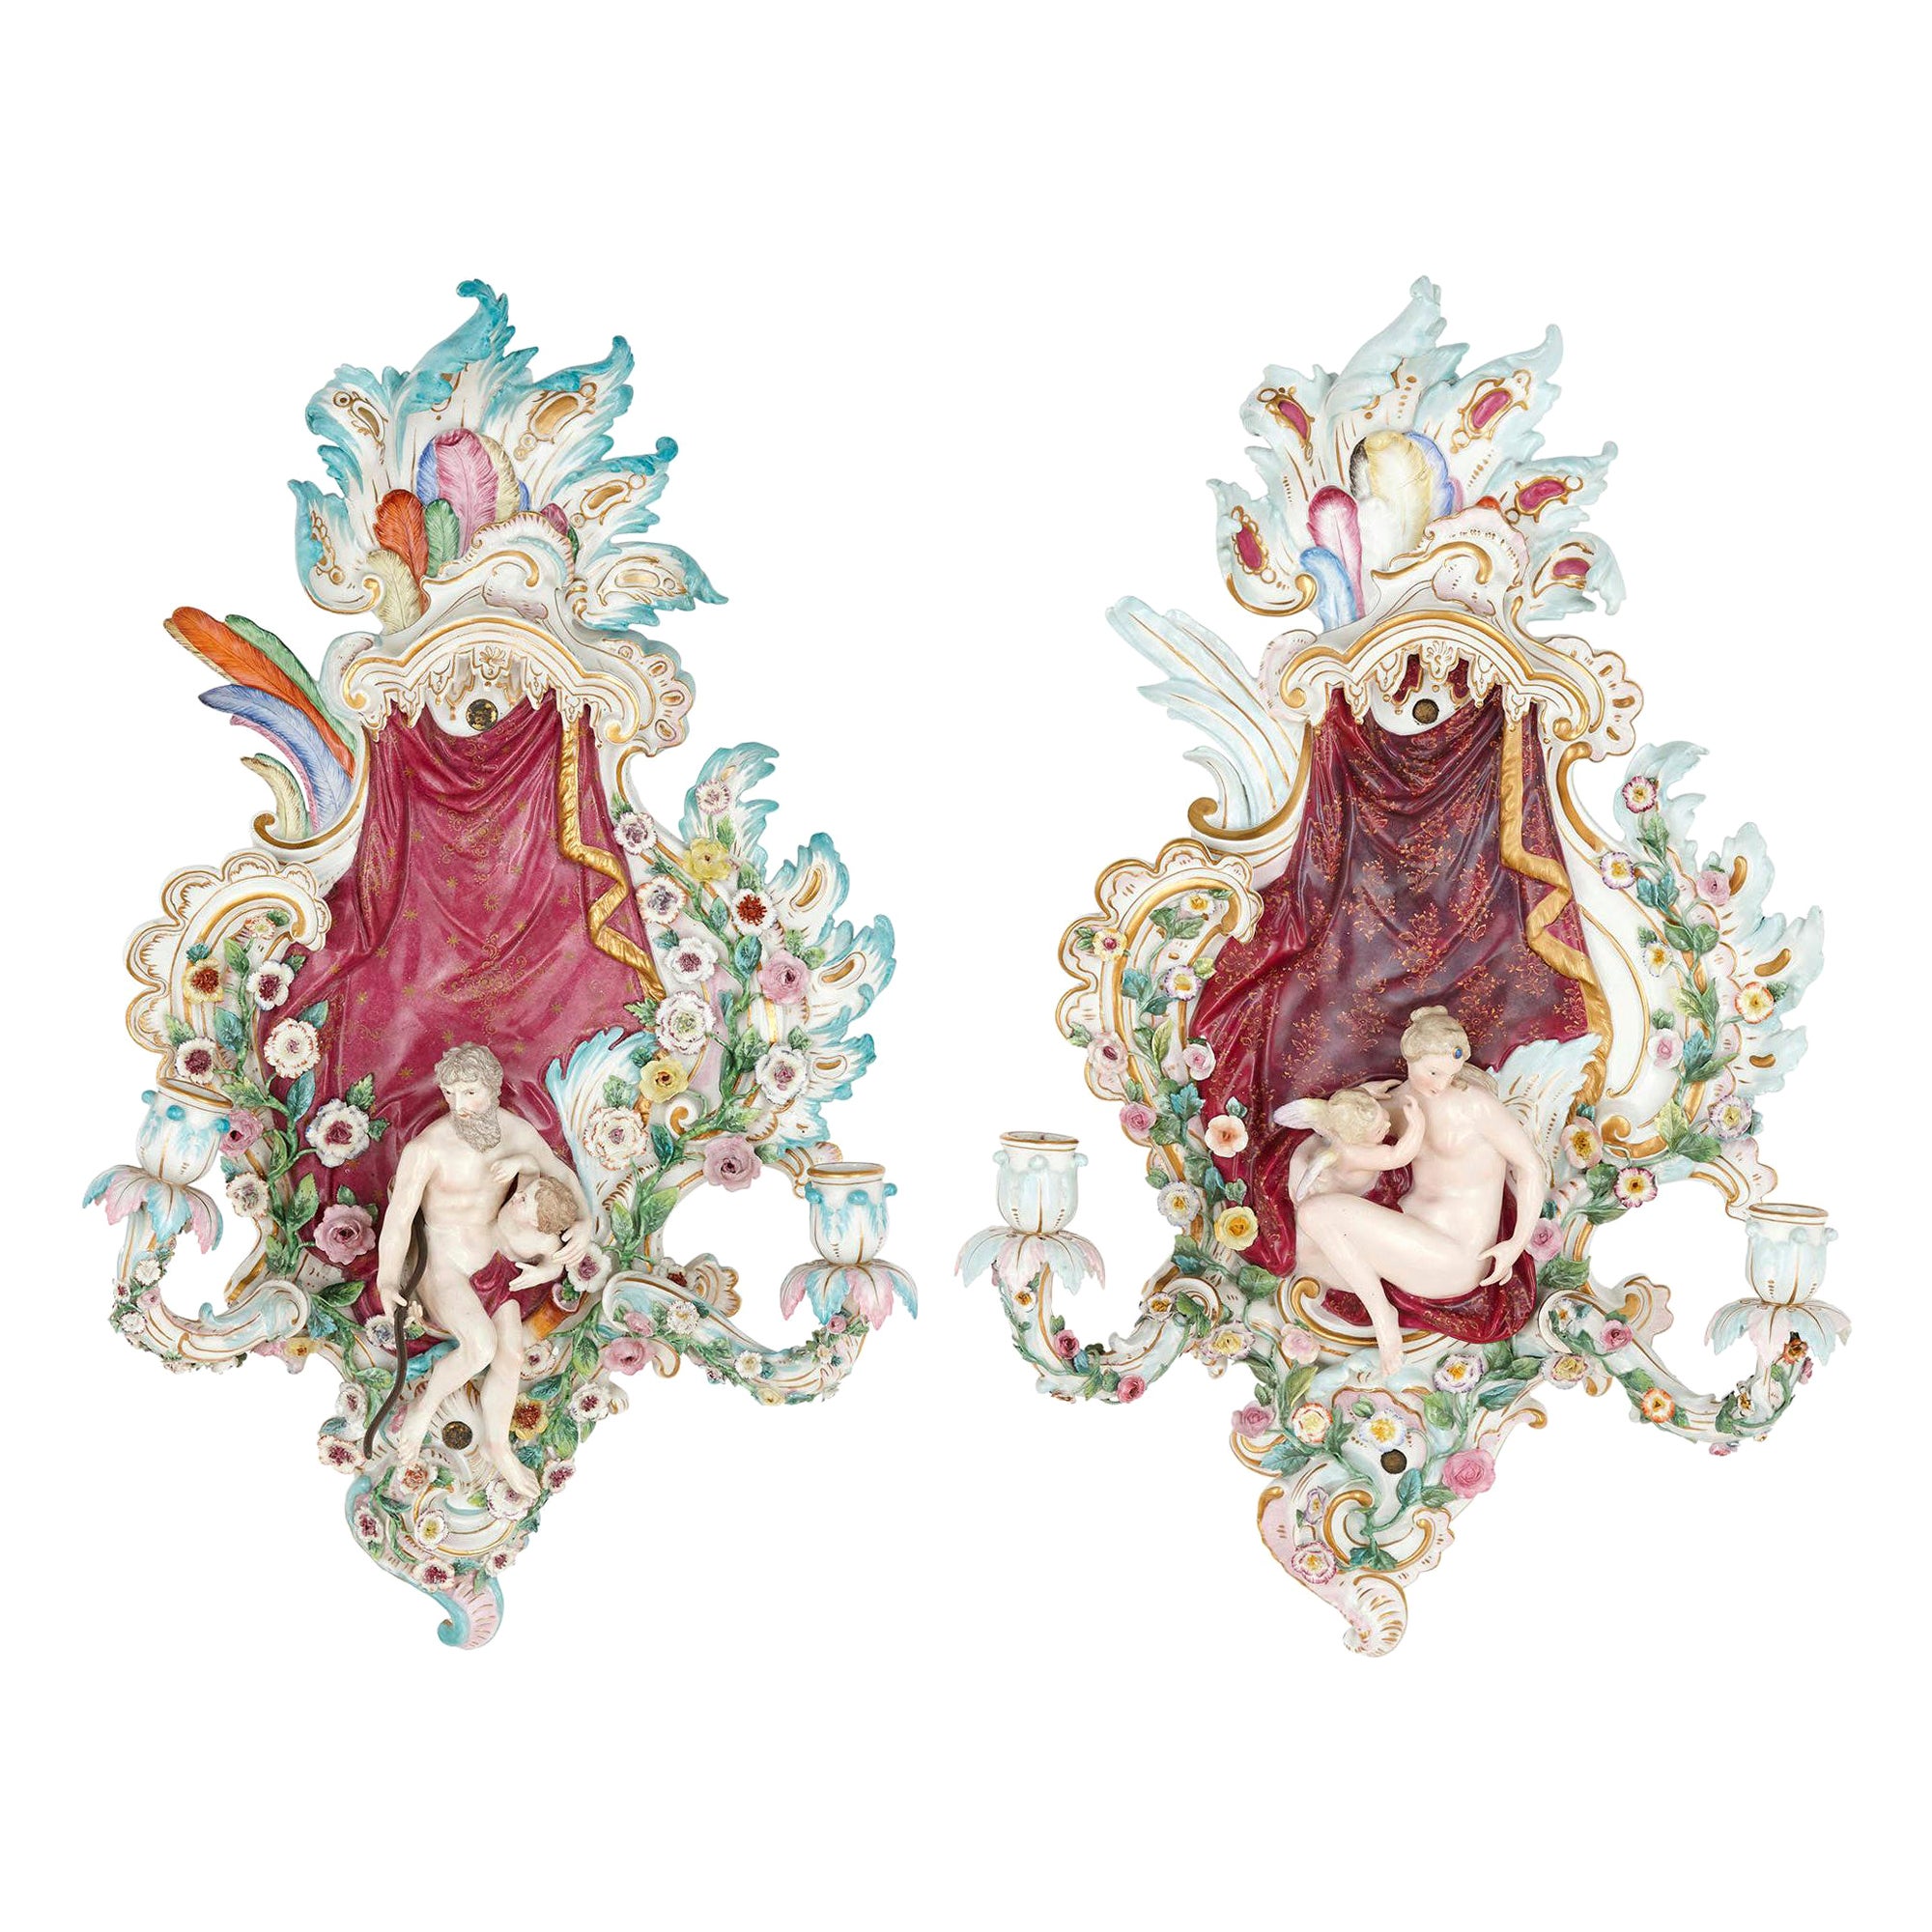 Pair of Porcelain Wall Sconces by Meissen